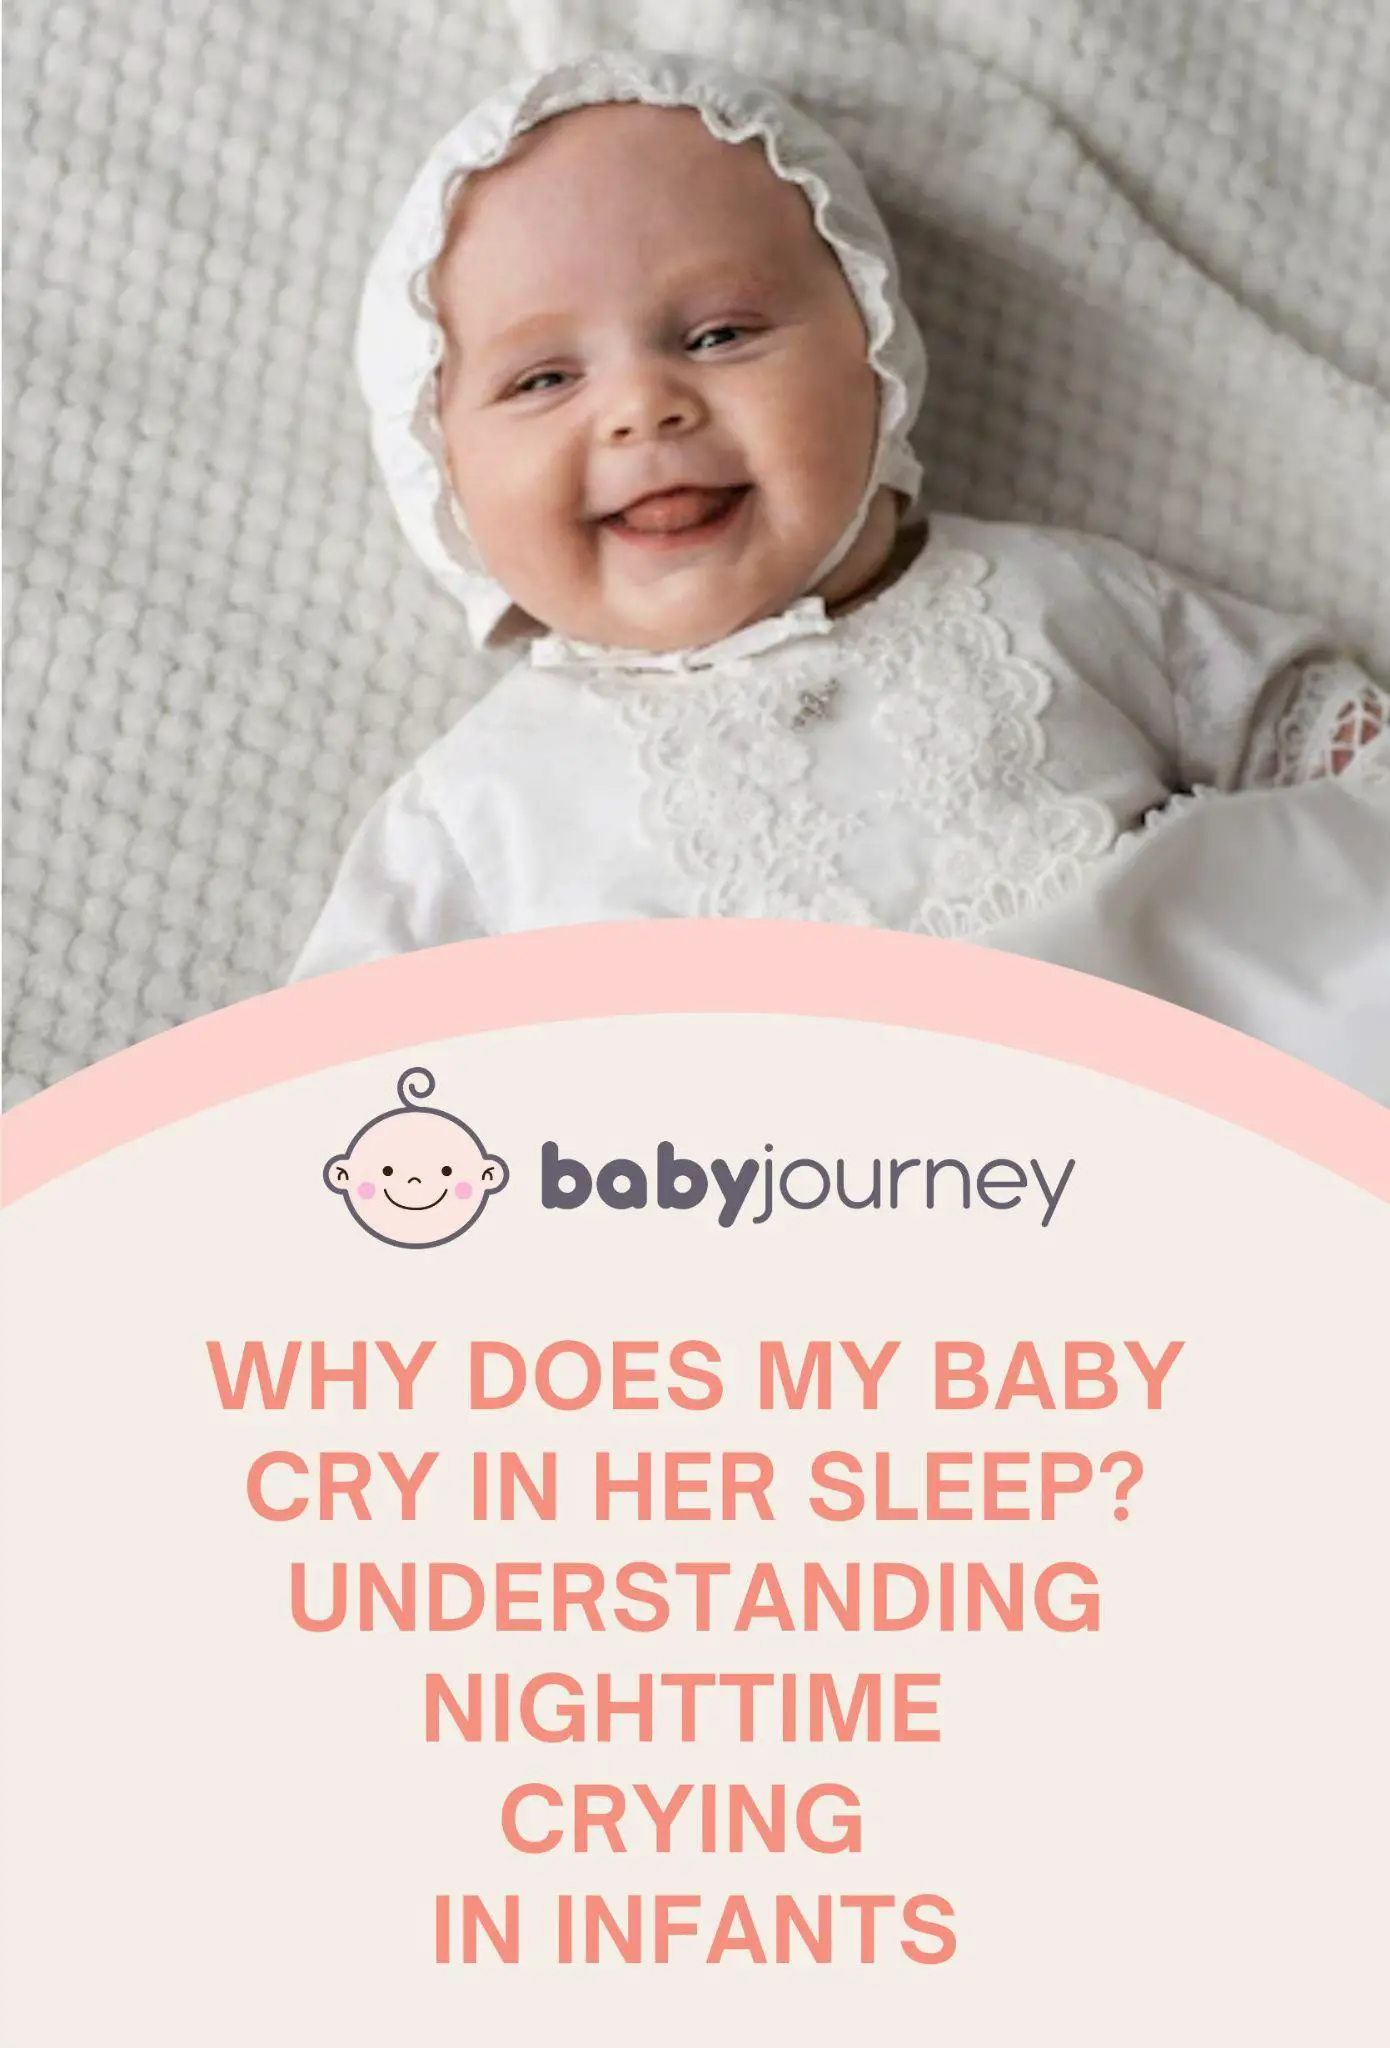 Baby Boy Christening Outfit: Tips for Choosing the Perfect Attire Pinterest Image - Baby Journey 